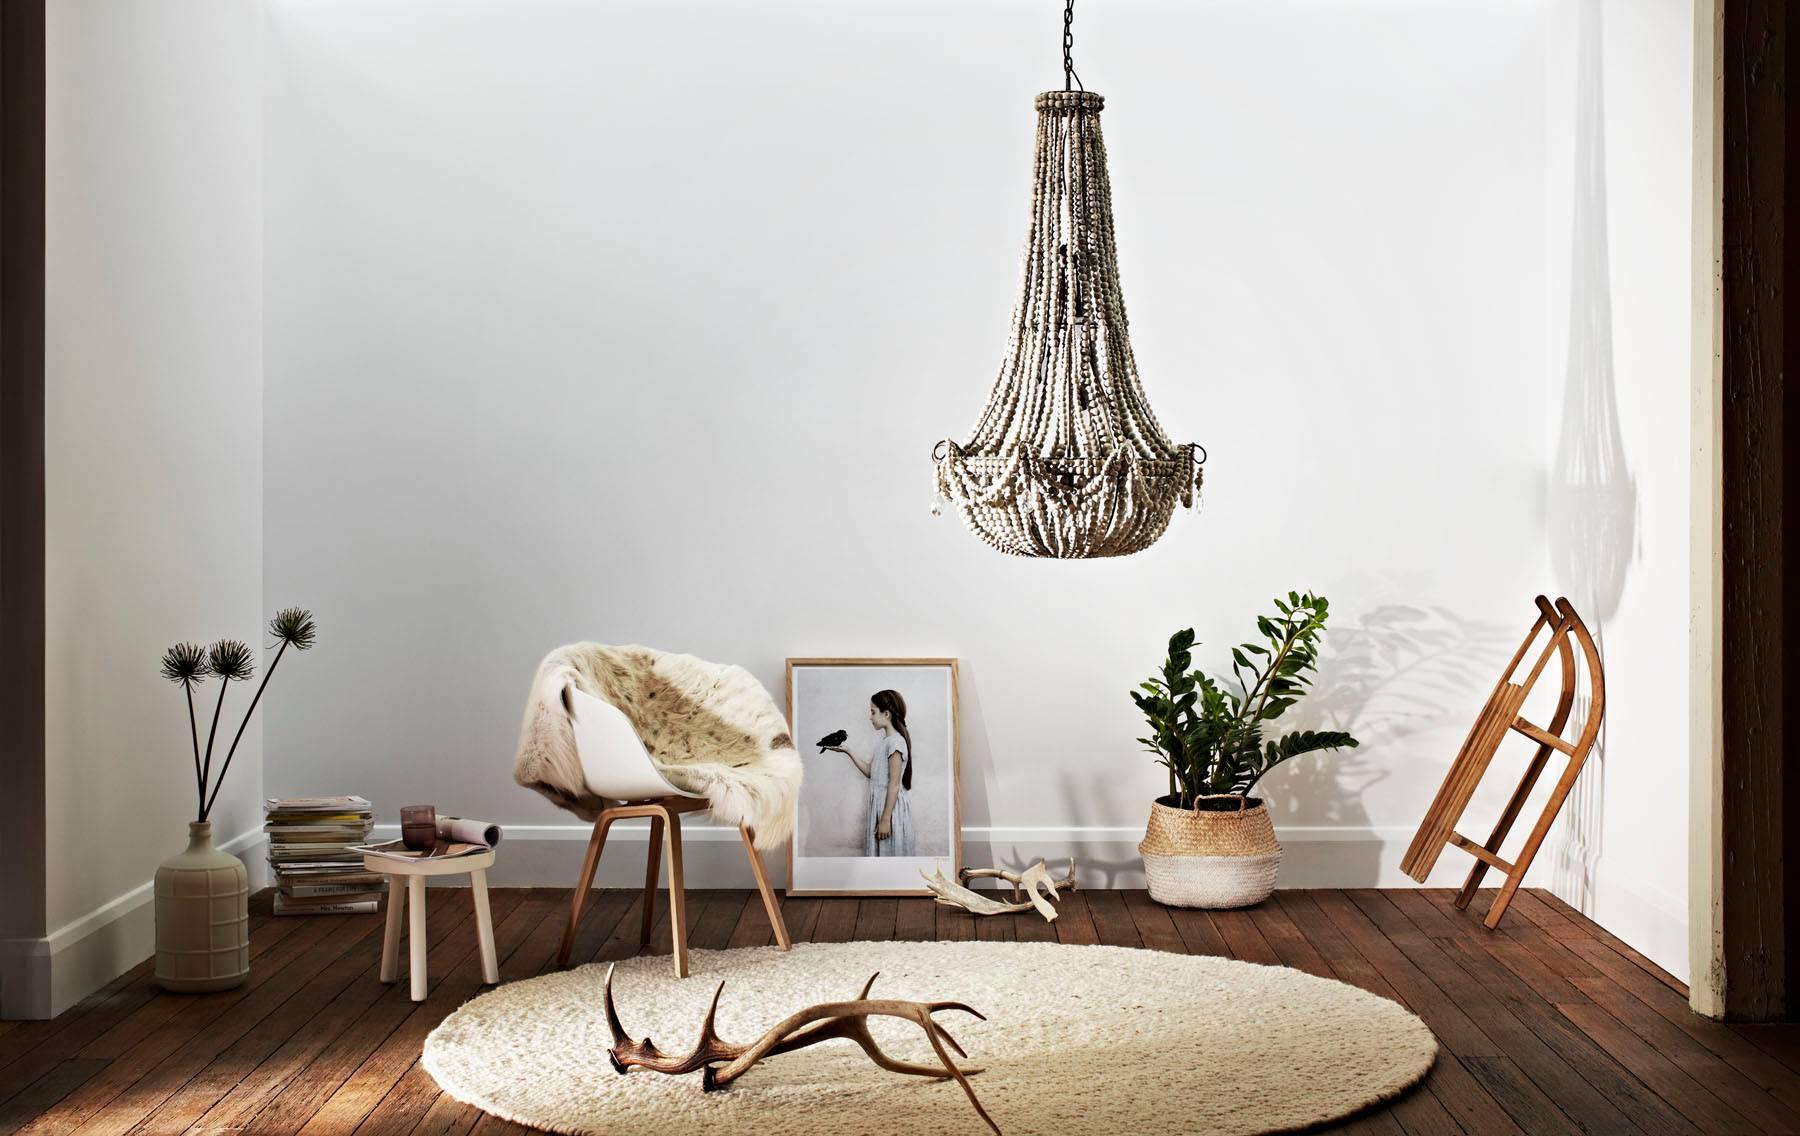 Long, lean and ever so lovely.

The elongated klaylife clay beaded chandelier is especially designed for tall, double volume spaces. Whether you have high ceilings or a large void like a stairwell that needs a statement pendant, this design mixes